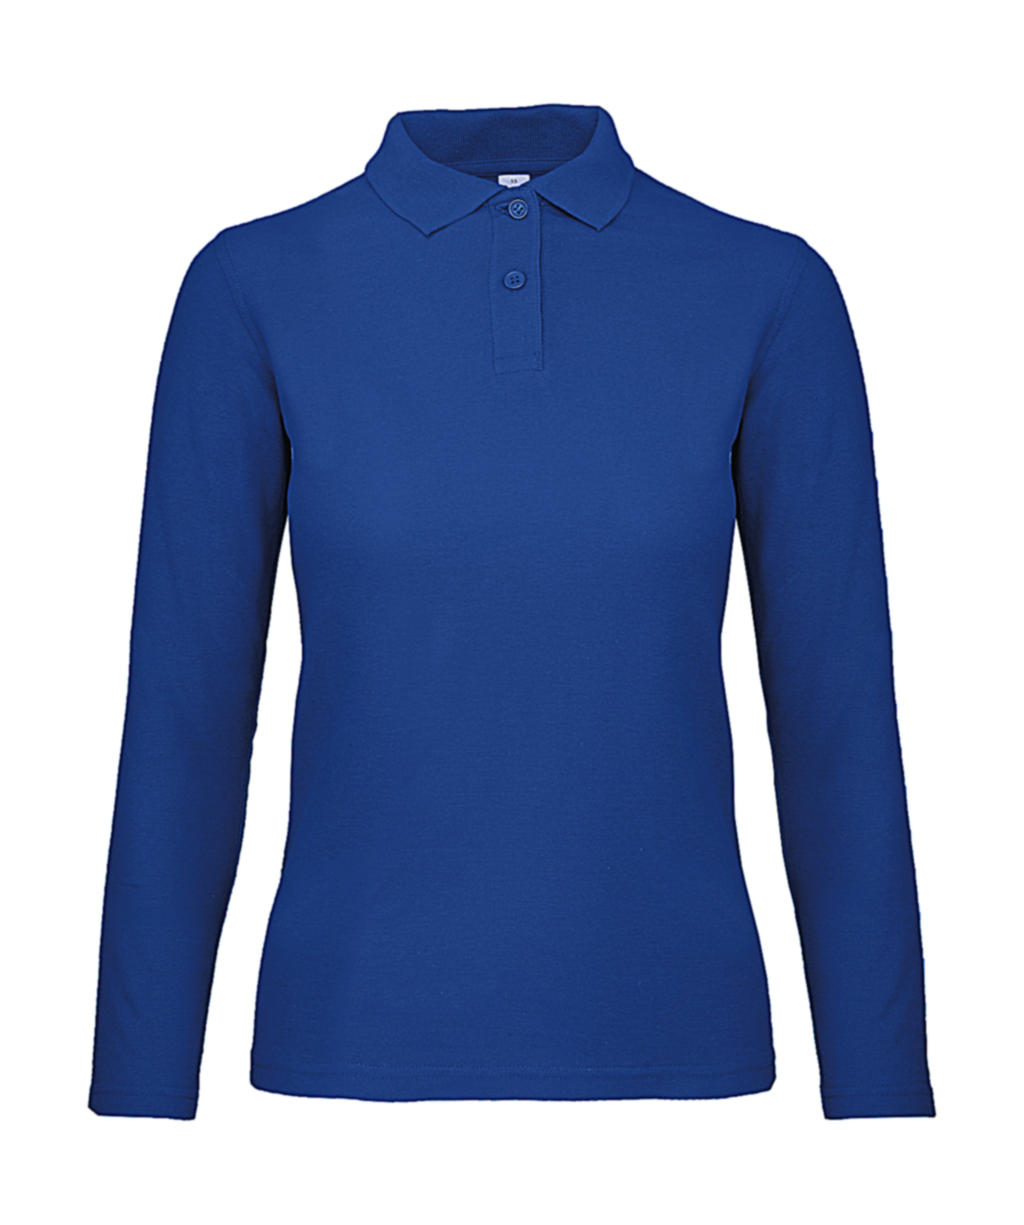  ID.001 LSL /women Polo in Farbe Royal Blue